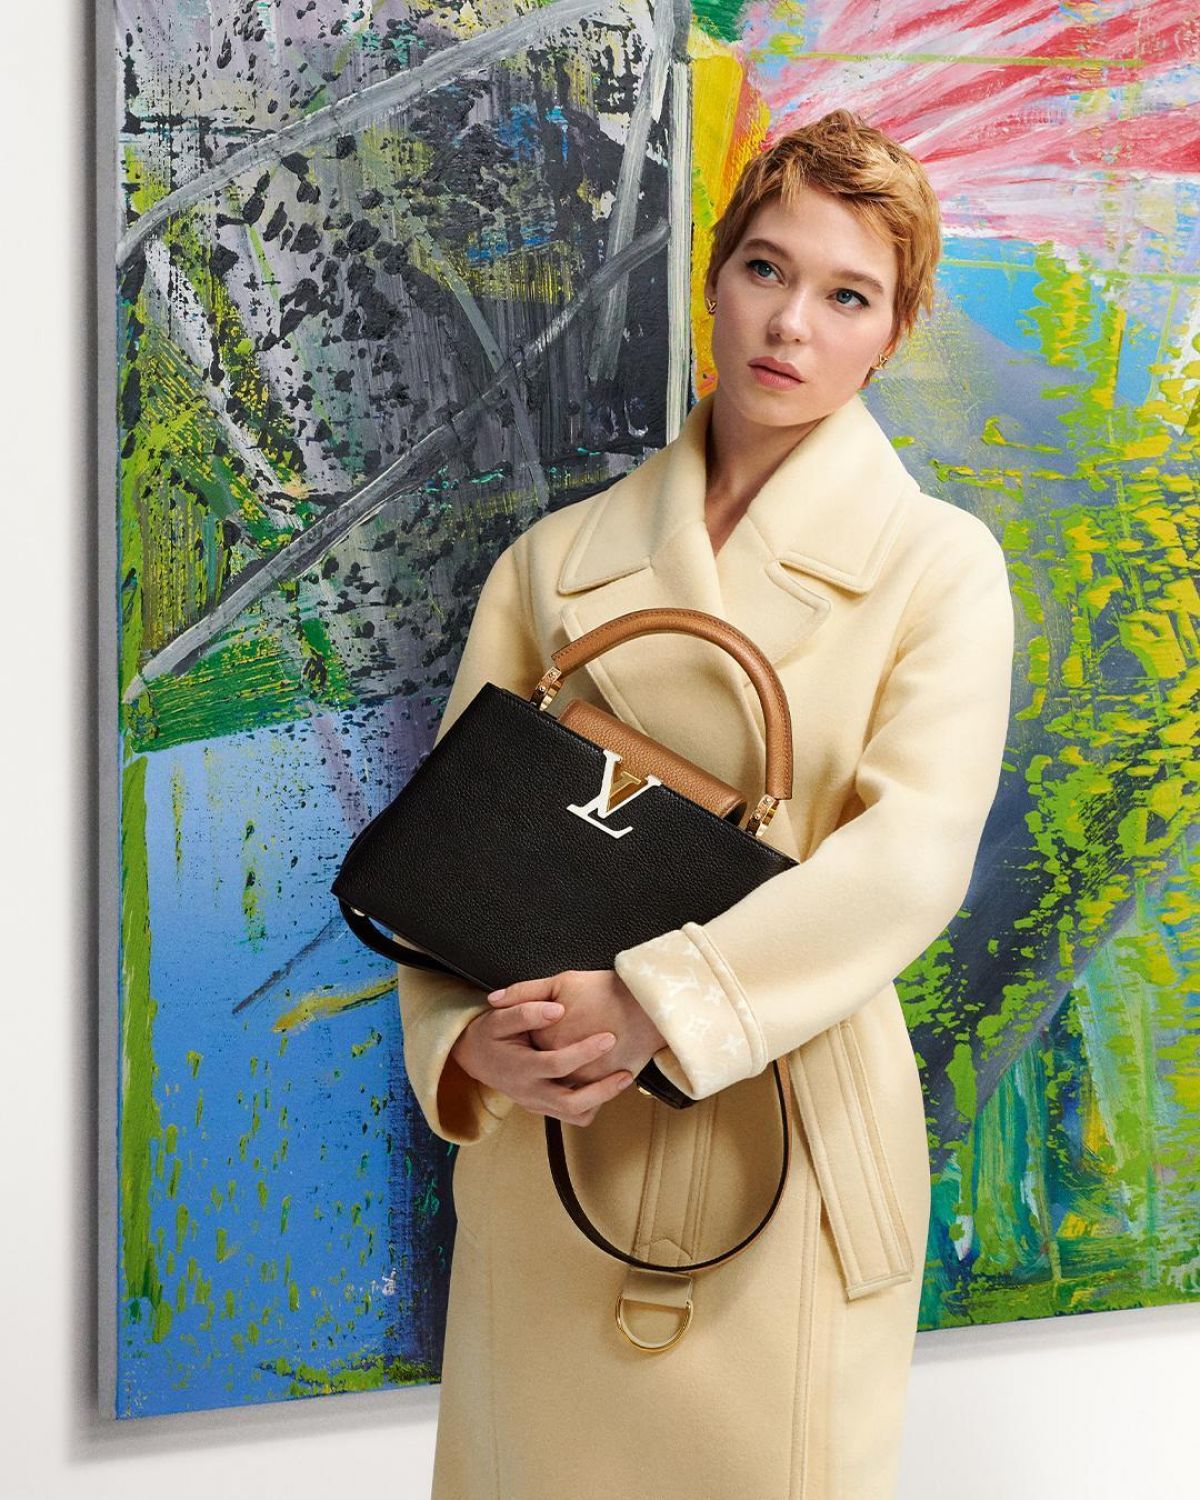 Lea Seydoux puts a 'Spell On You' with latest Louis Vuitton fragrance -  Duty Free Hunter